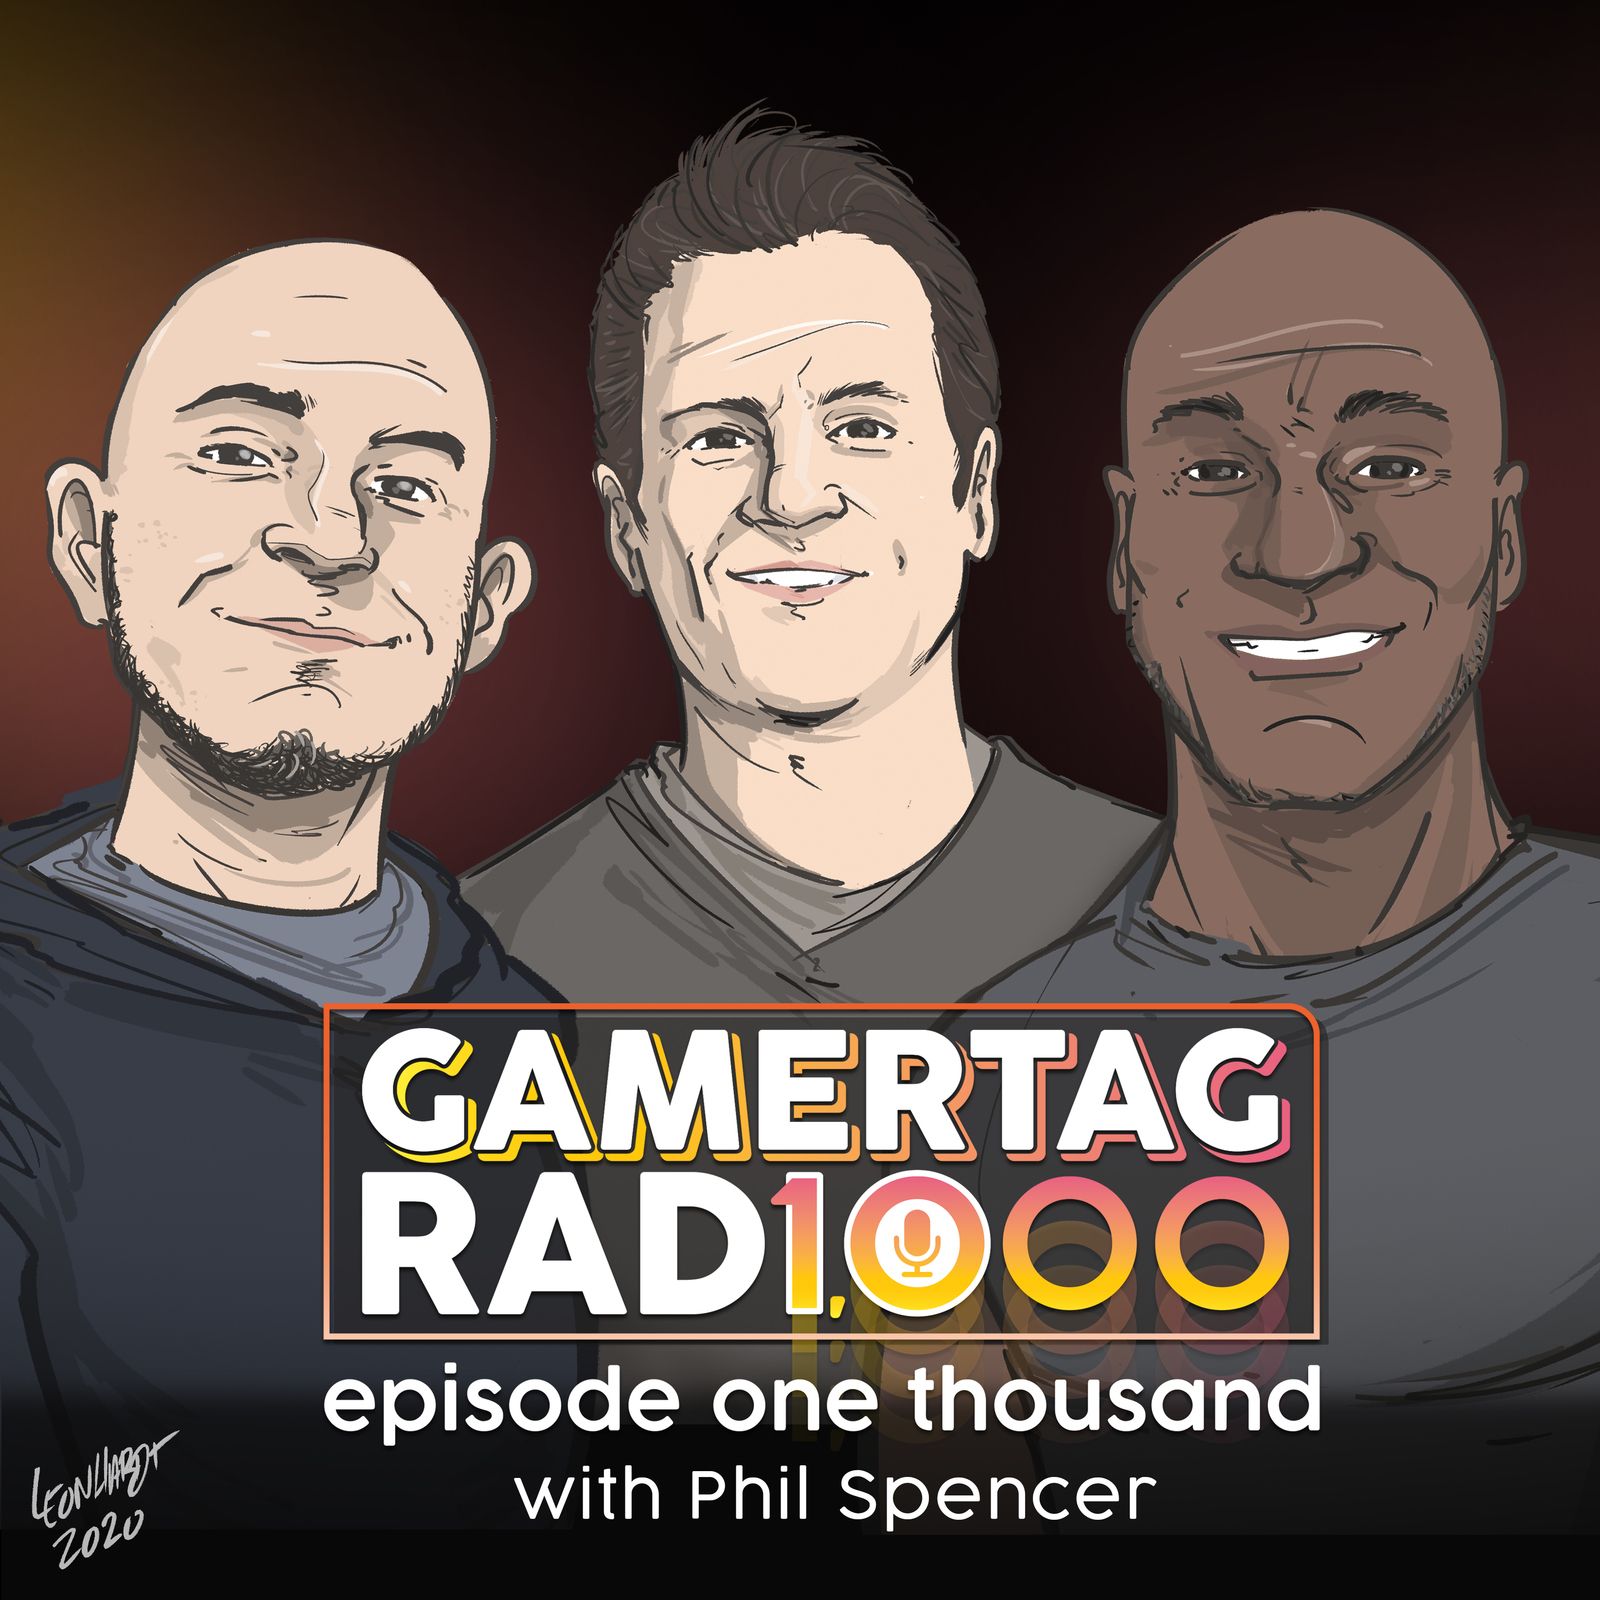 Gamertag Radio: Interview with Phil Spencer about The Past